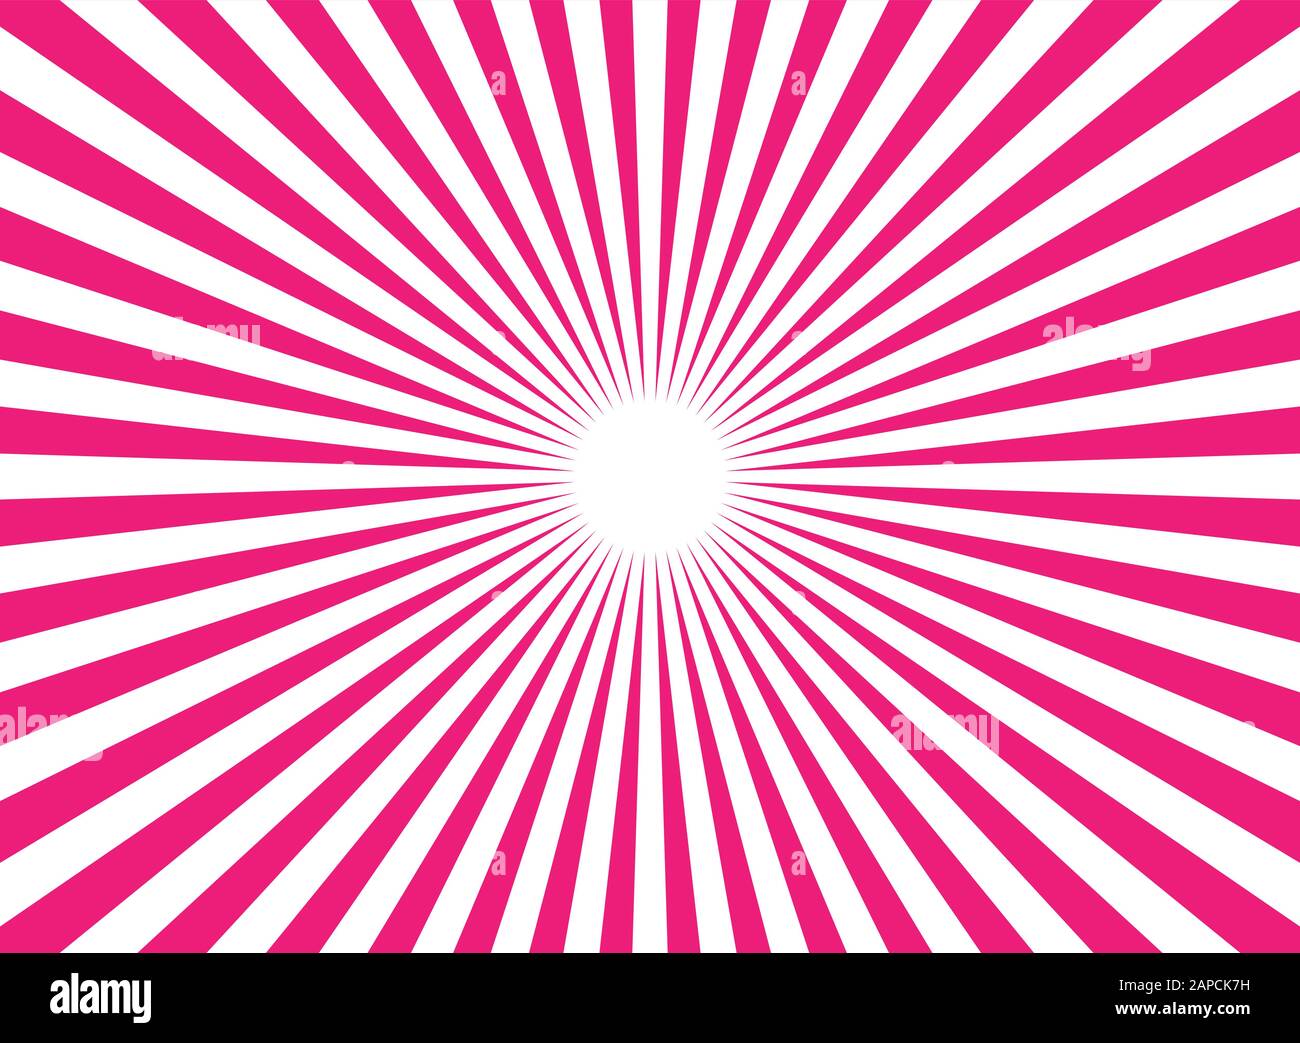 Sunlight abstract background. Pink and white color burst background with spot. Vector illustration. Sun beam ray sunburst pattern background. Retro br Stock Vector